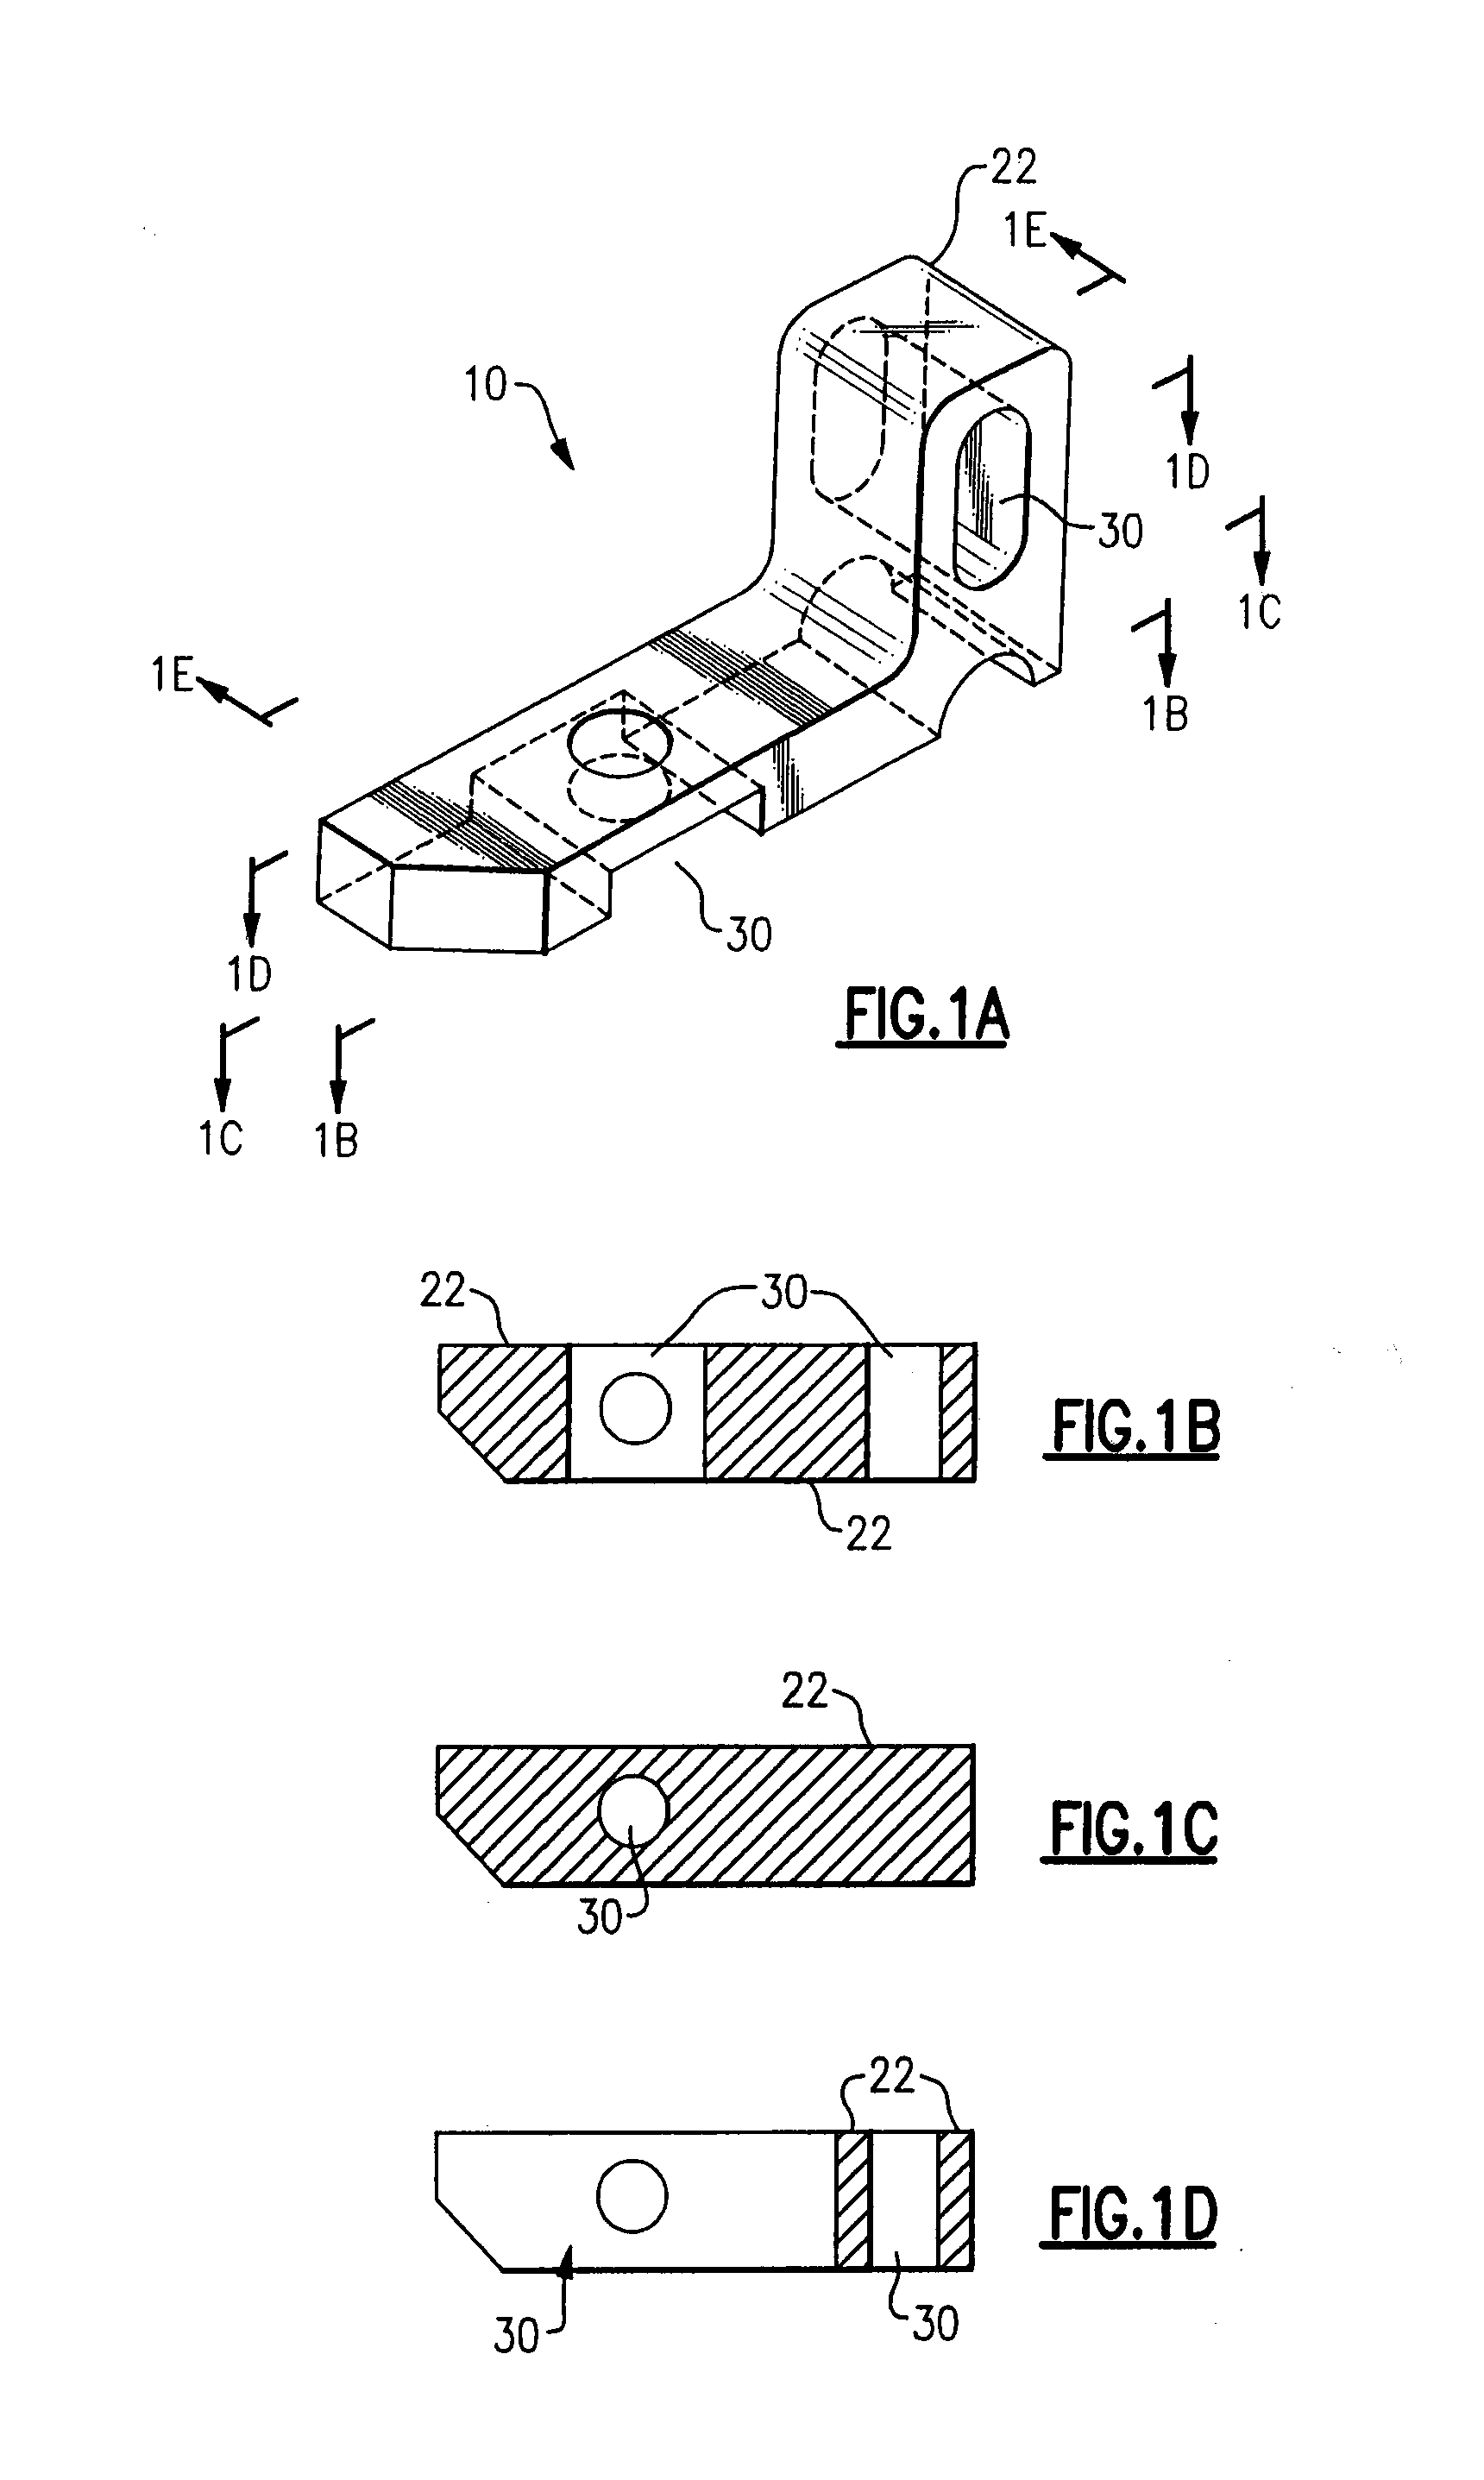 Method for fabricating three dimensional models